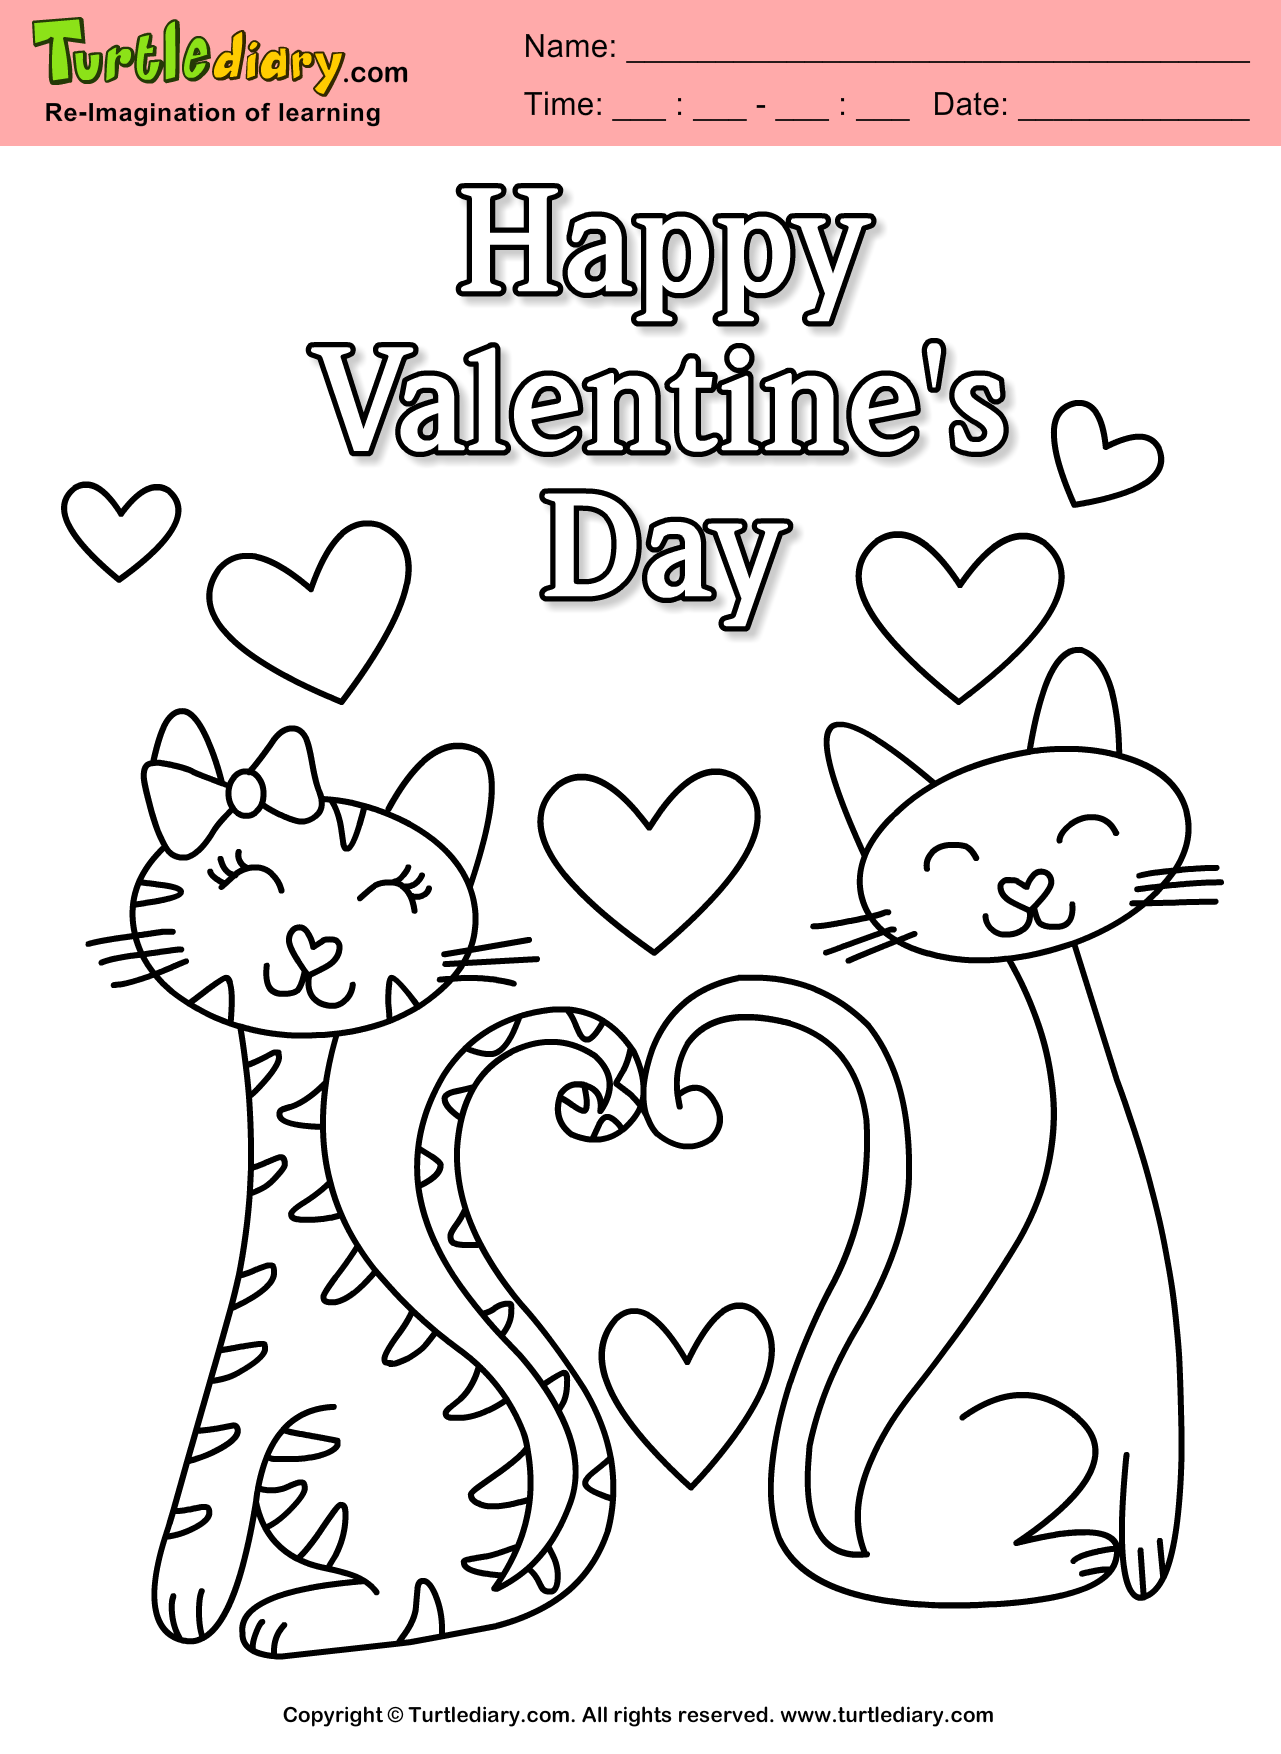 Happy Valentines Day Coloring Sheet   Turtle Diary